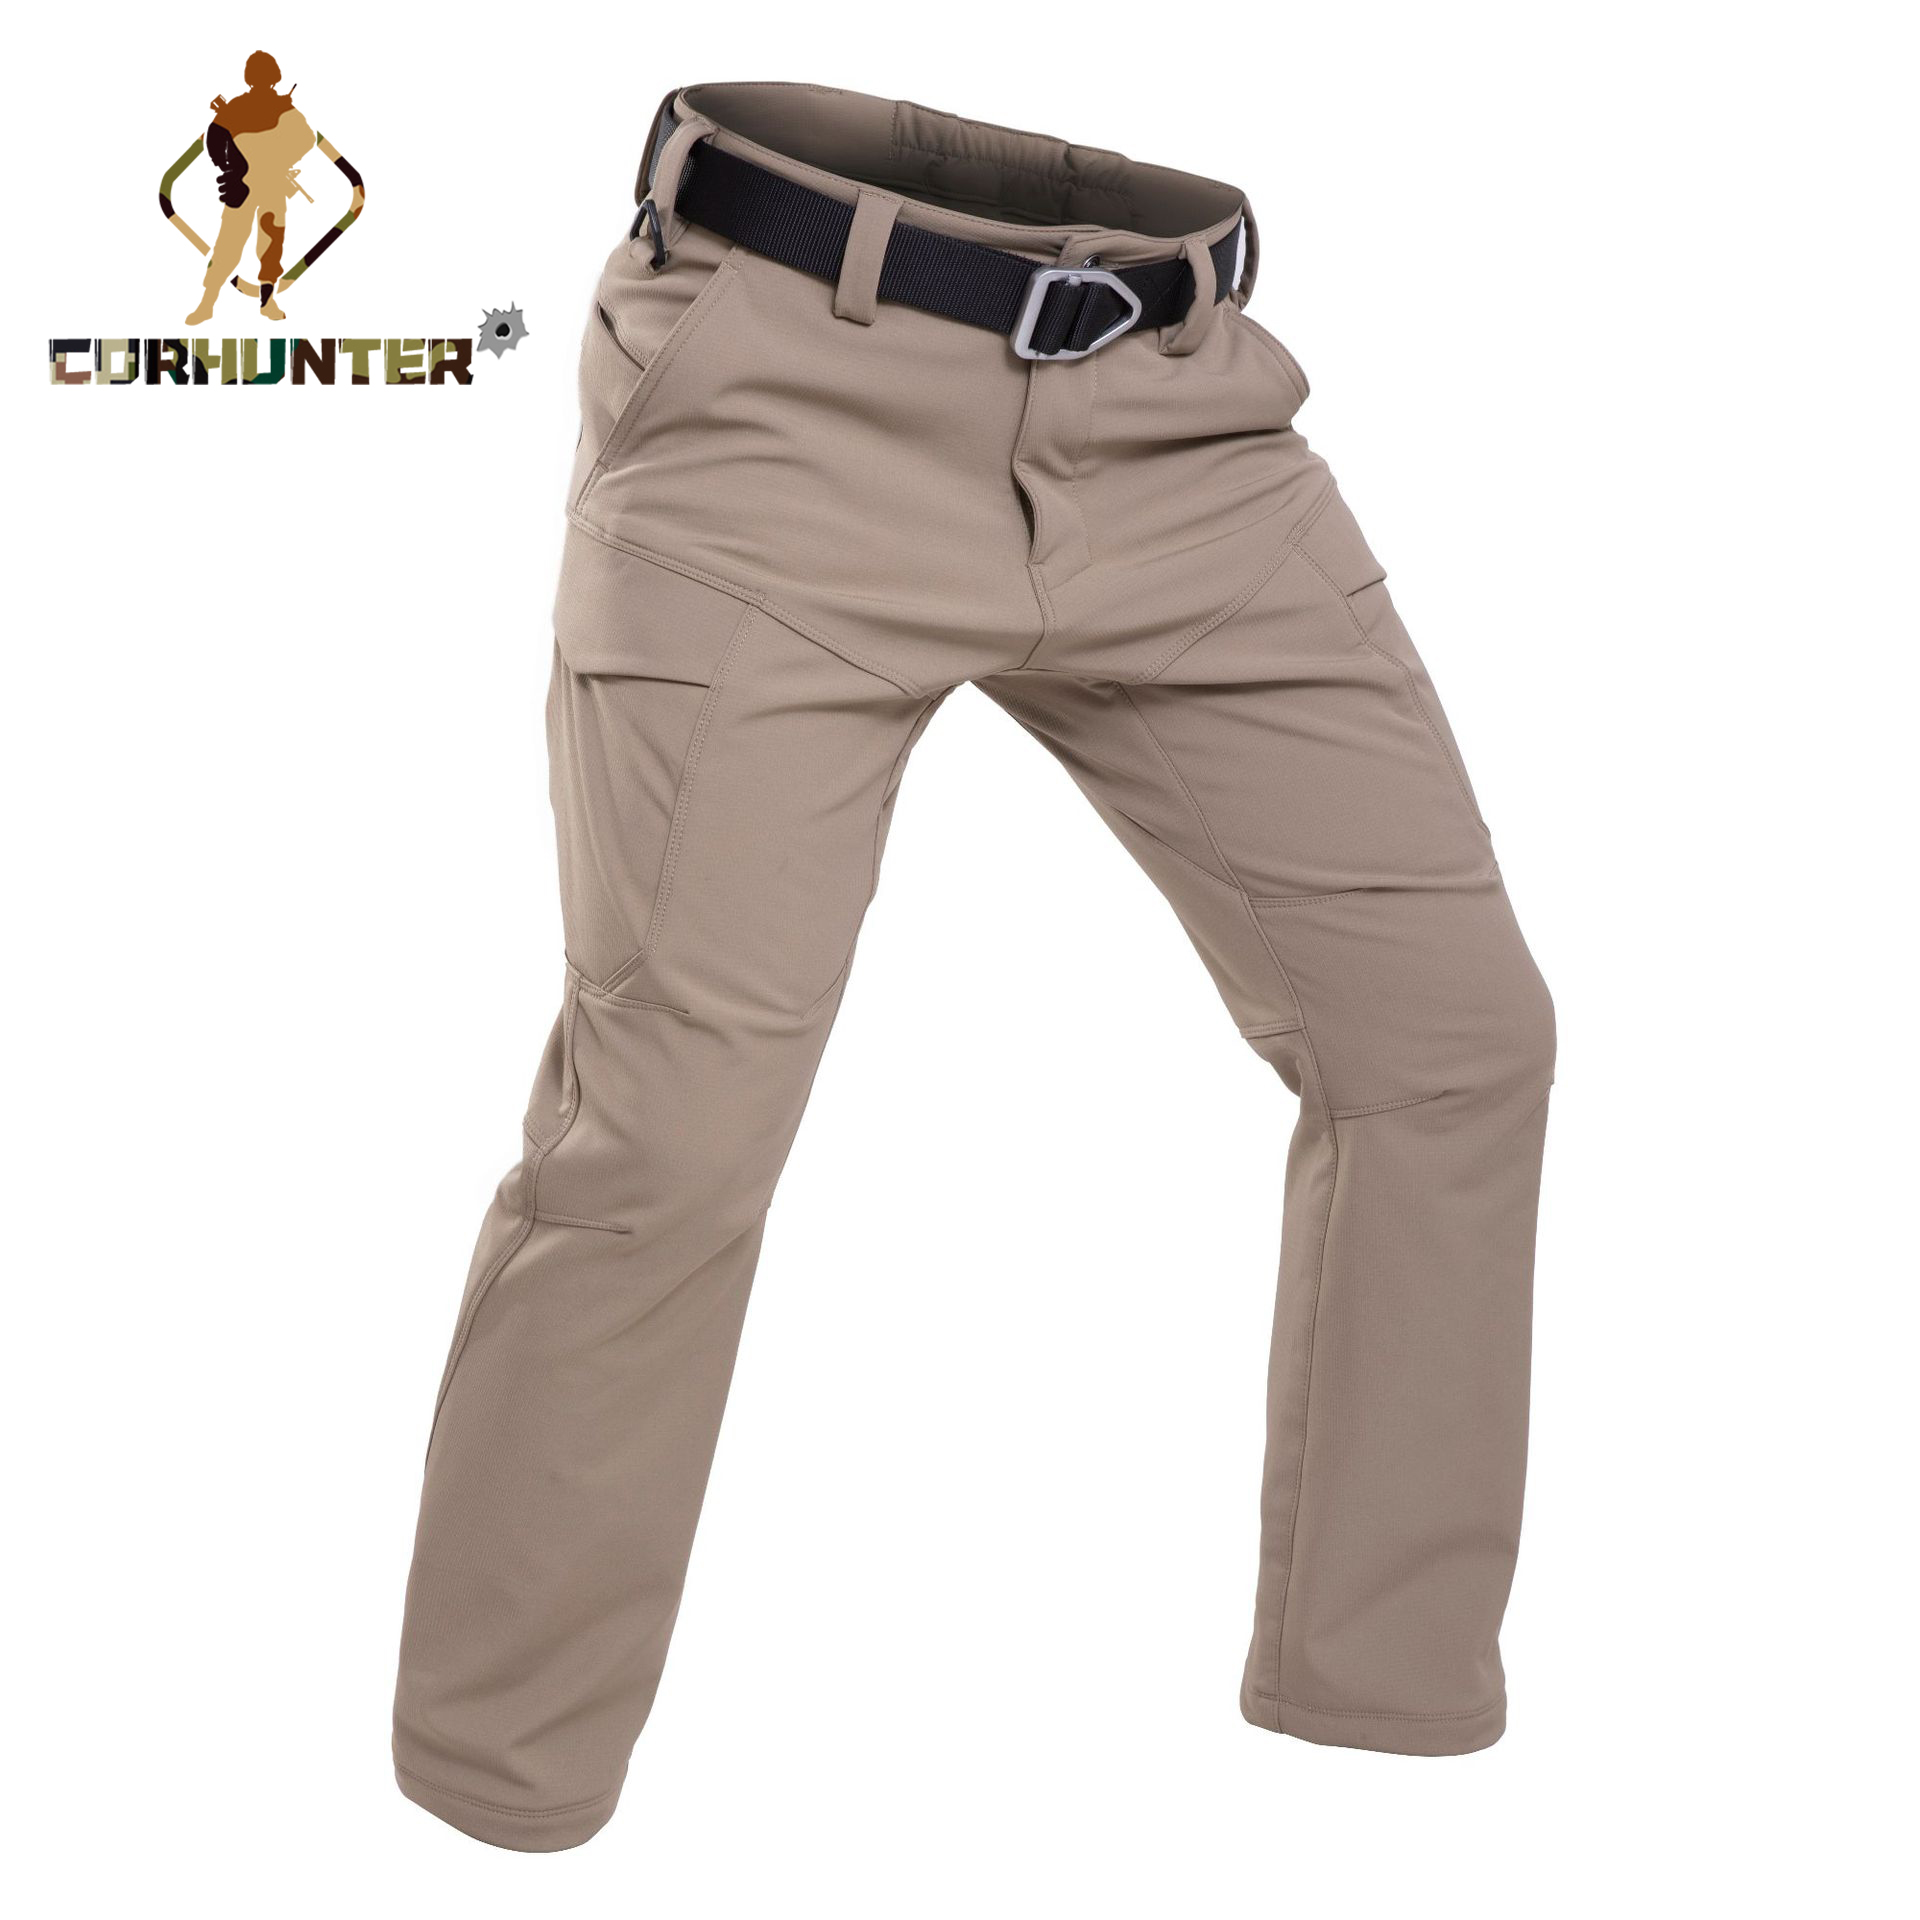 Autumn and winter high quality casual business trousers stretch men's casual pants thick section wholesale stock